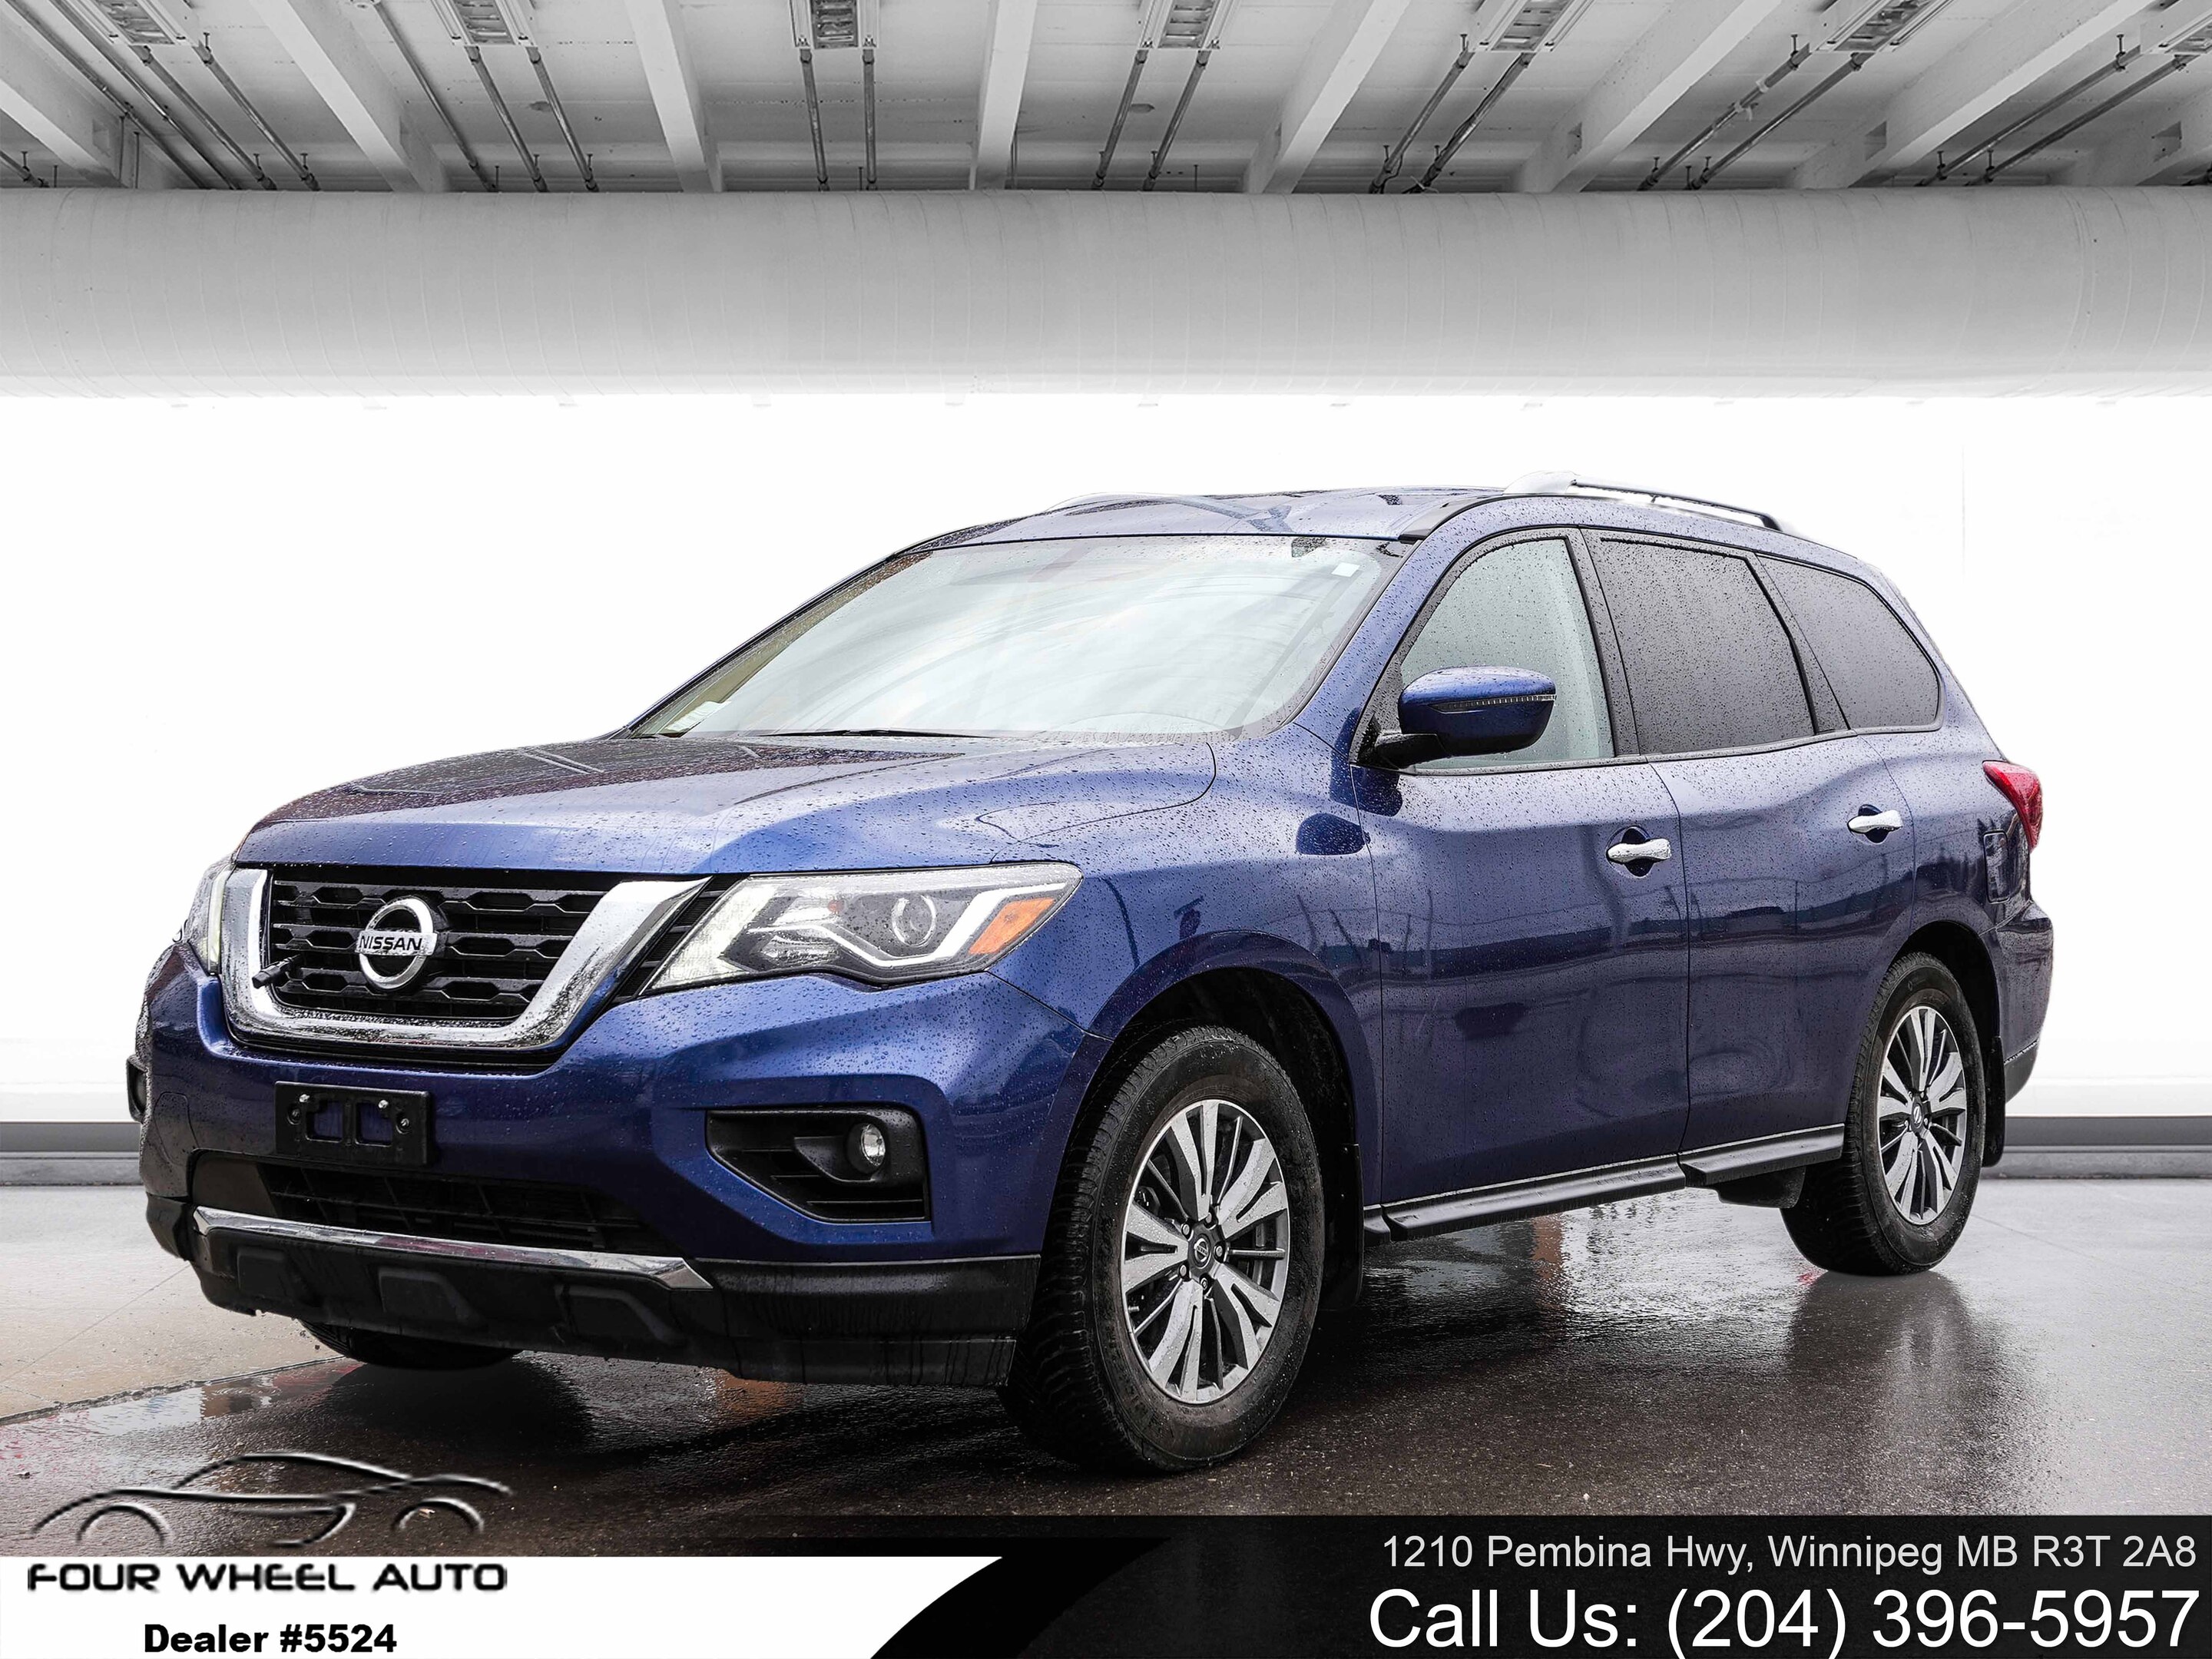 2018 Nissan Pathfinder 4x4 SV |No accident|7 seats|Local trade|